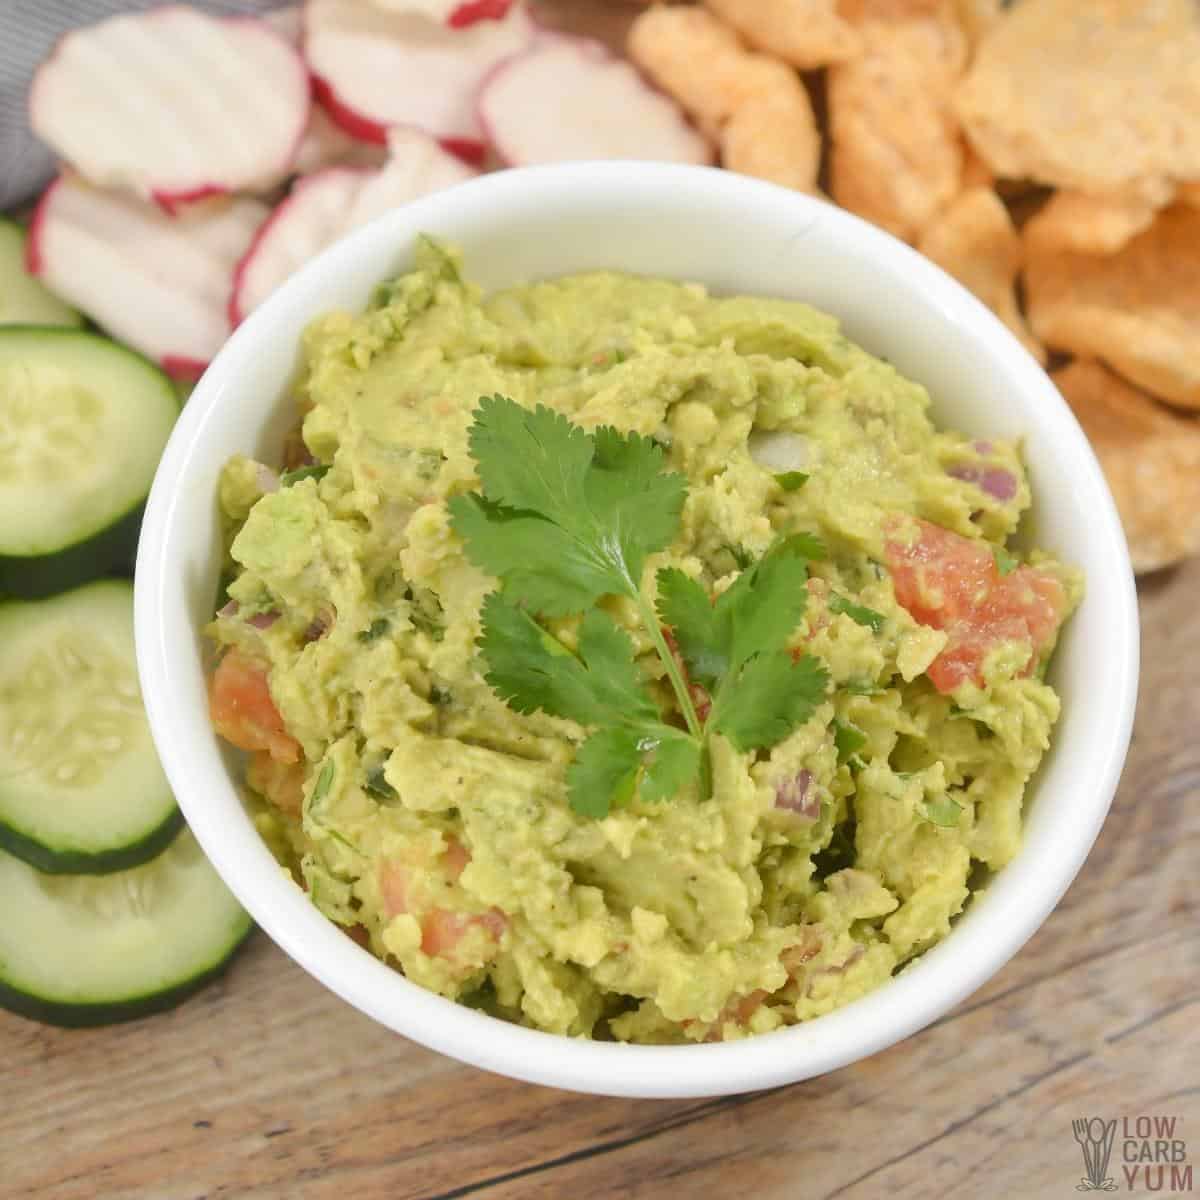 guacamole in white bowl with vegetables and pork rinds.